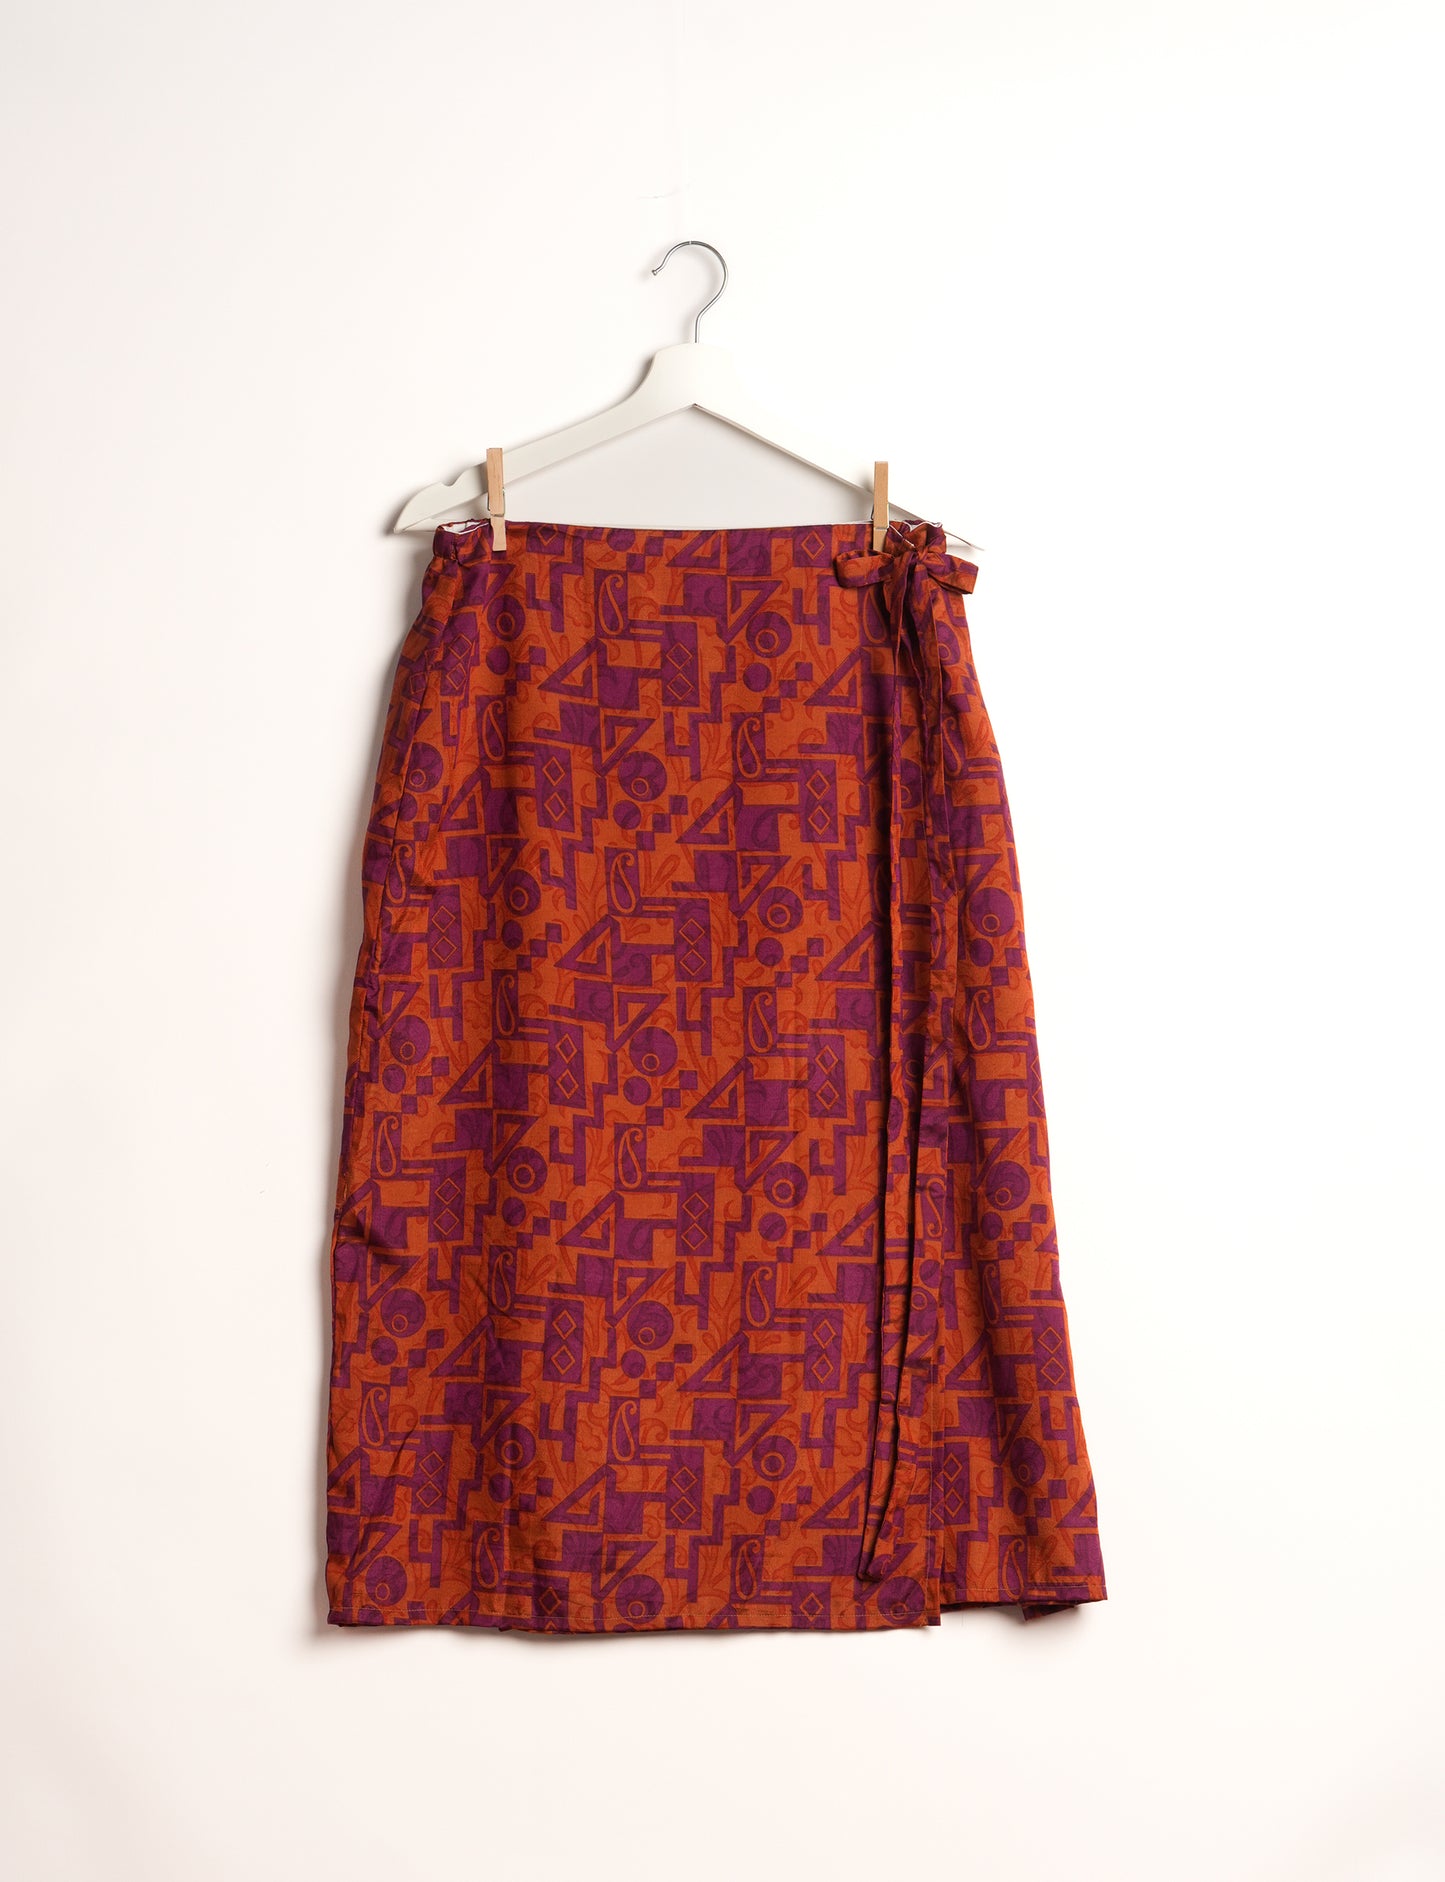 Versatile and sustainable LONG WRAPAROUND SKIRT, mid-calf length, defying convention and suitable for all waist sizes. Elevate your style with this eco-friendly and comfortable piece, creating a unique and inclusive fashion experience.